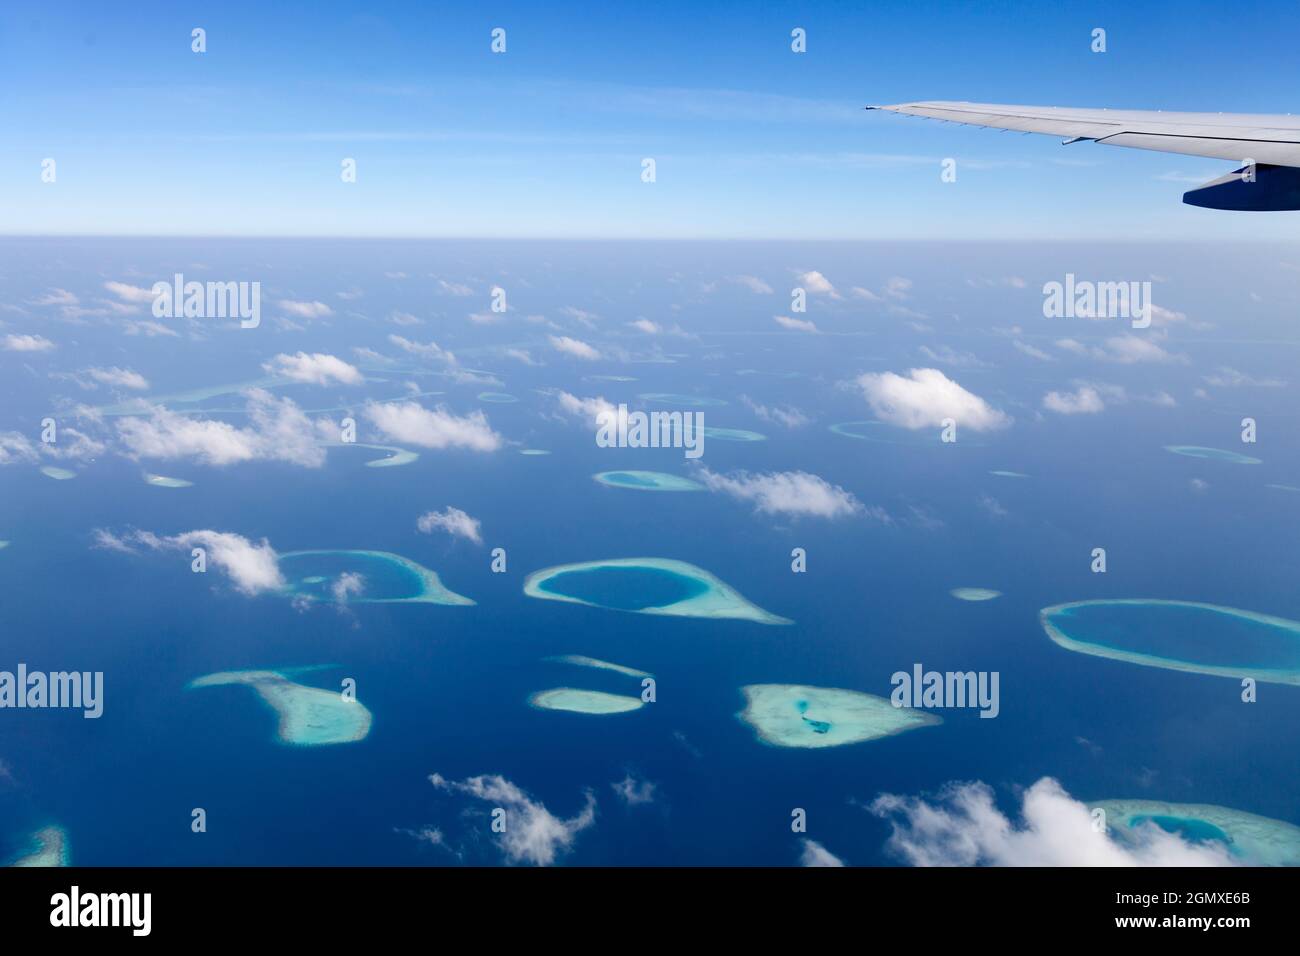 Maldives, Indian Ocean - 8 February 2014; View from the window of an airplane flying above the Maldives in the Indian Ocean. The Maldives is an idylli Stock Photo